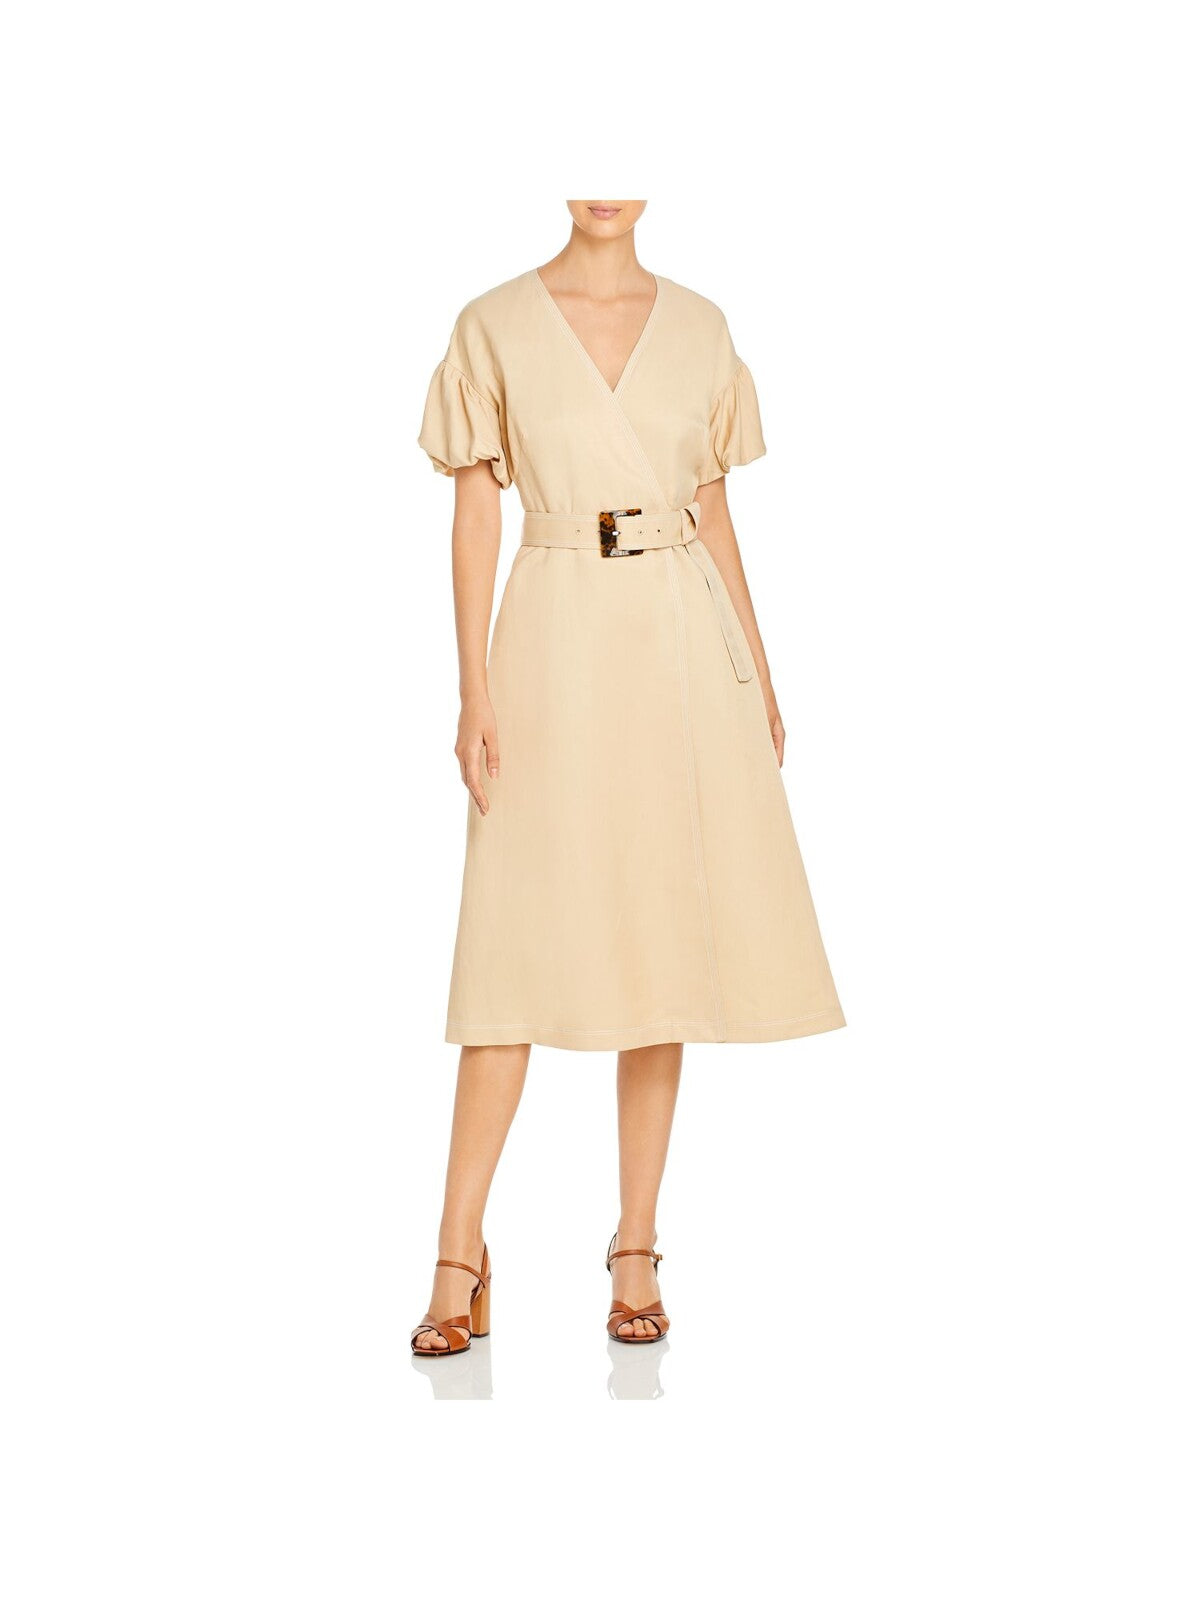 LAFAYETTE 148 Womens Beige Belted Darted Side Pockets Button Front Closur Short Sleeve V Neck Knee Length Party Faux Wrap Dress XL